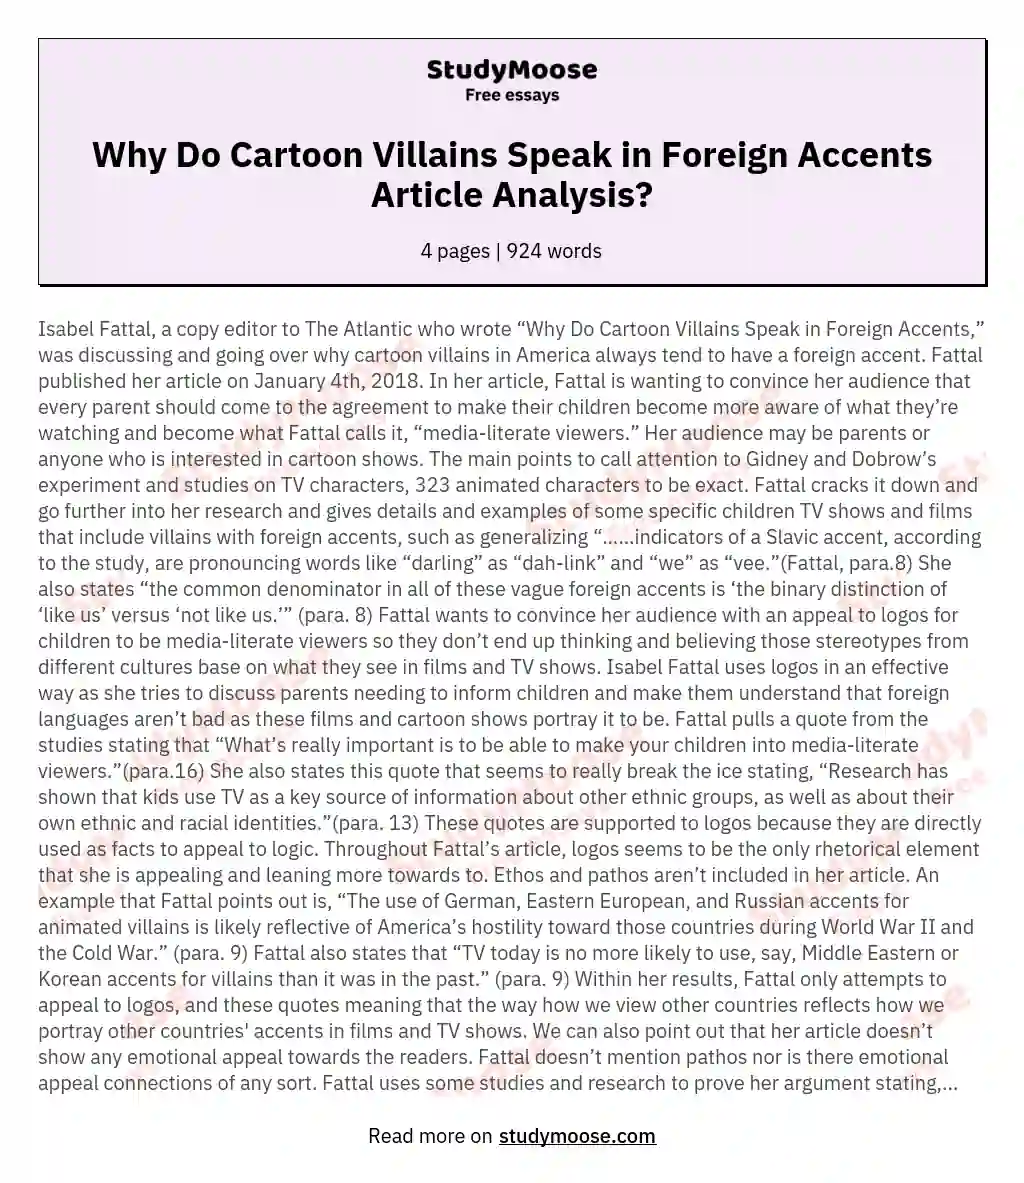 Why Do Cartoon Villains Speak in Foreign Accents Article Analysis?